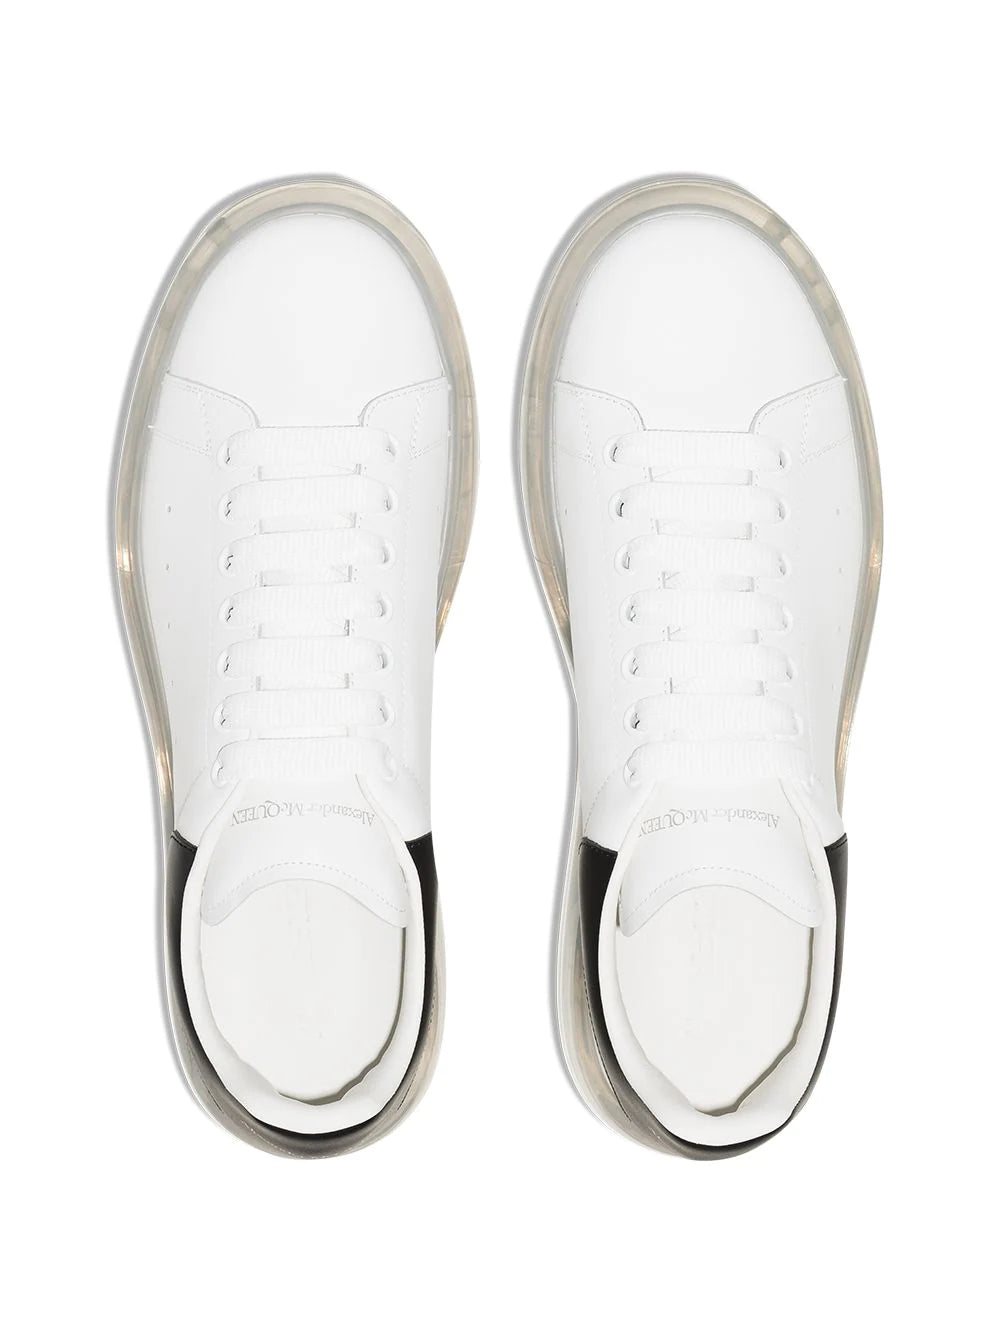 Alexander McQueen Oversized Clear Sole Leather Sneakers White/Black - MAISONDEFASHION.COM